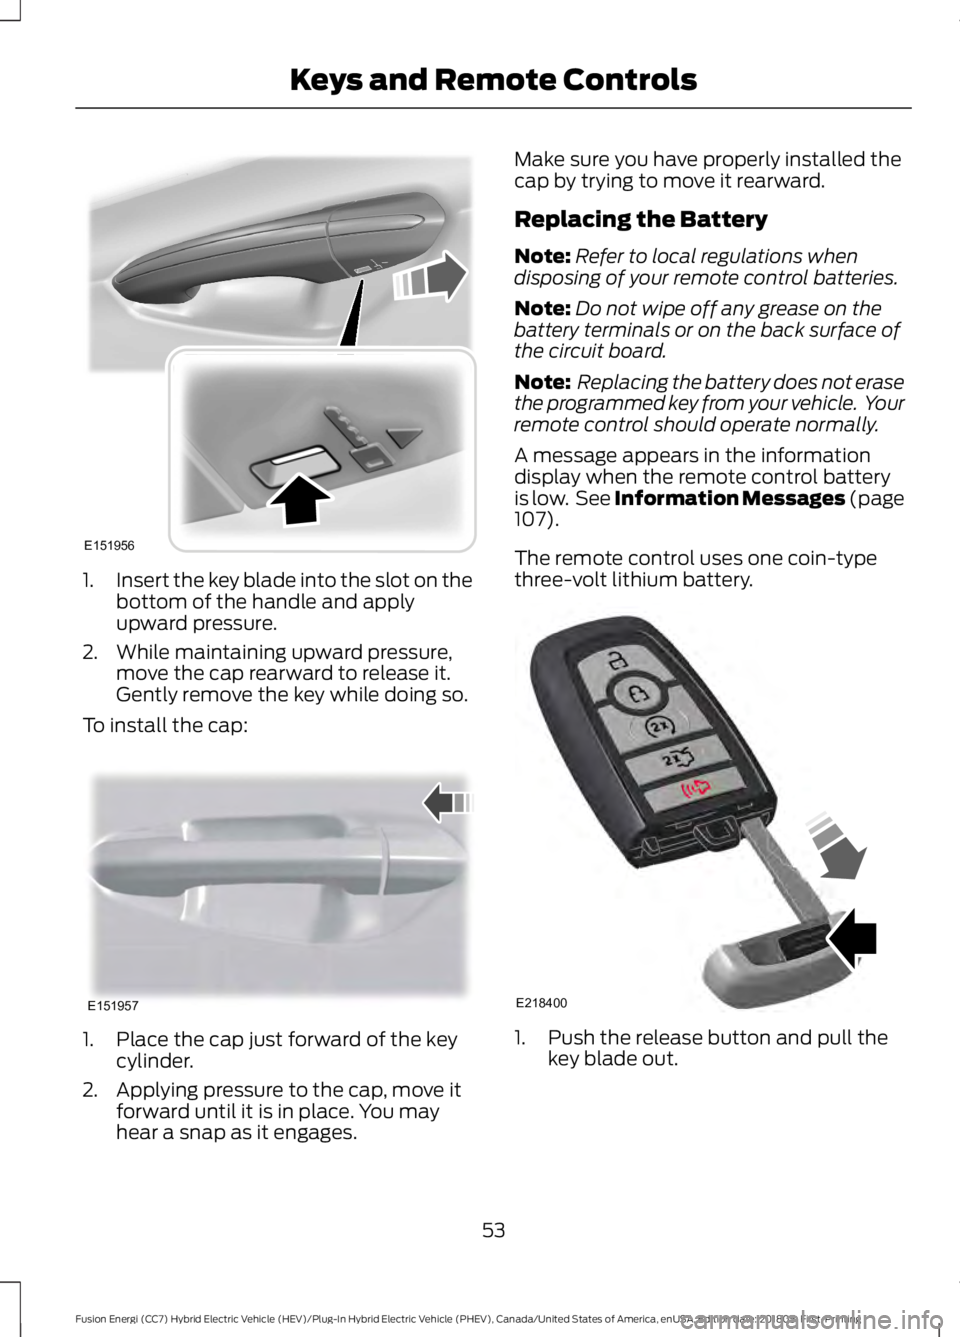 FORD FUSION HYBRID 2019  Owners Manual 1.
Insert the key blade into the slot on the
bottom of the handle and apply
upward pressure.
2. While maintaining upward pressure, move the cap rearward to release it.
Gently remove the key while doin